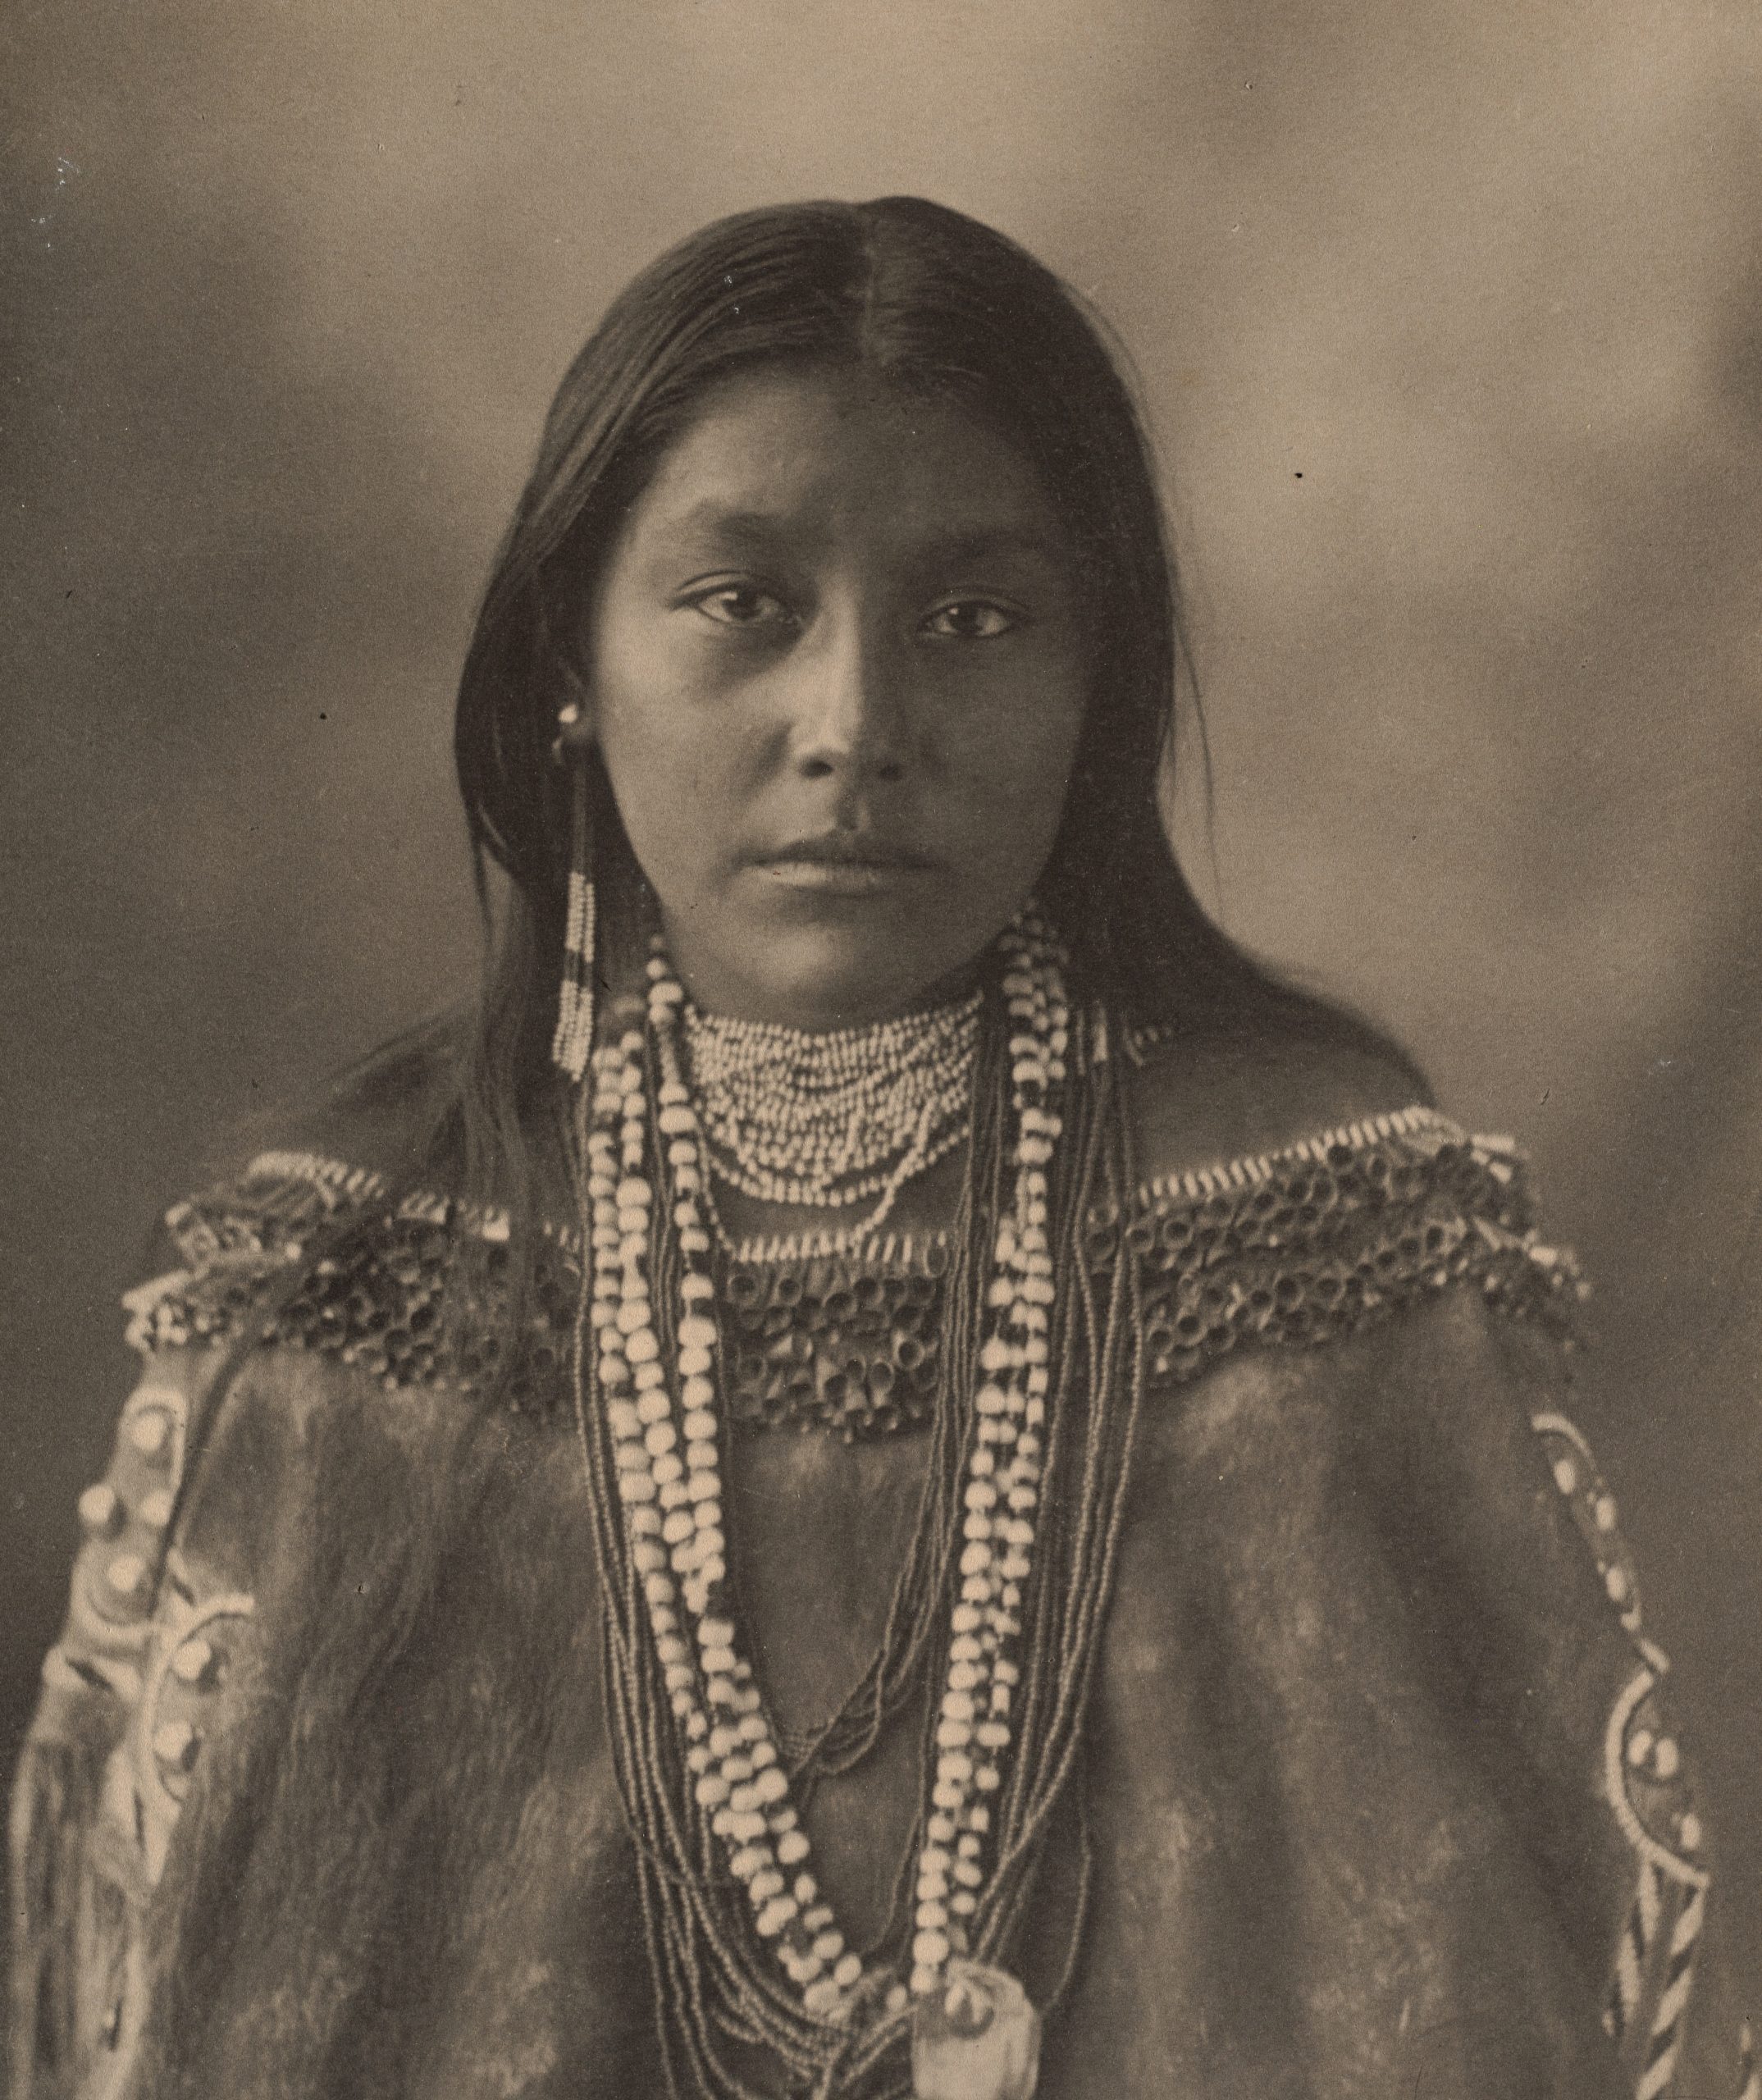 Black and white photograph of a woman with darker, Native American toned skin